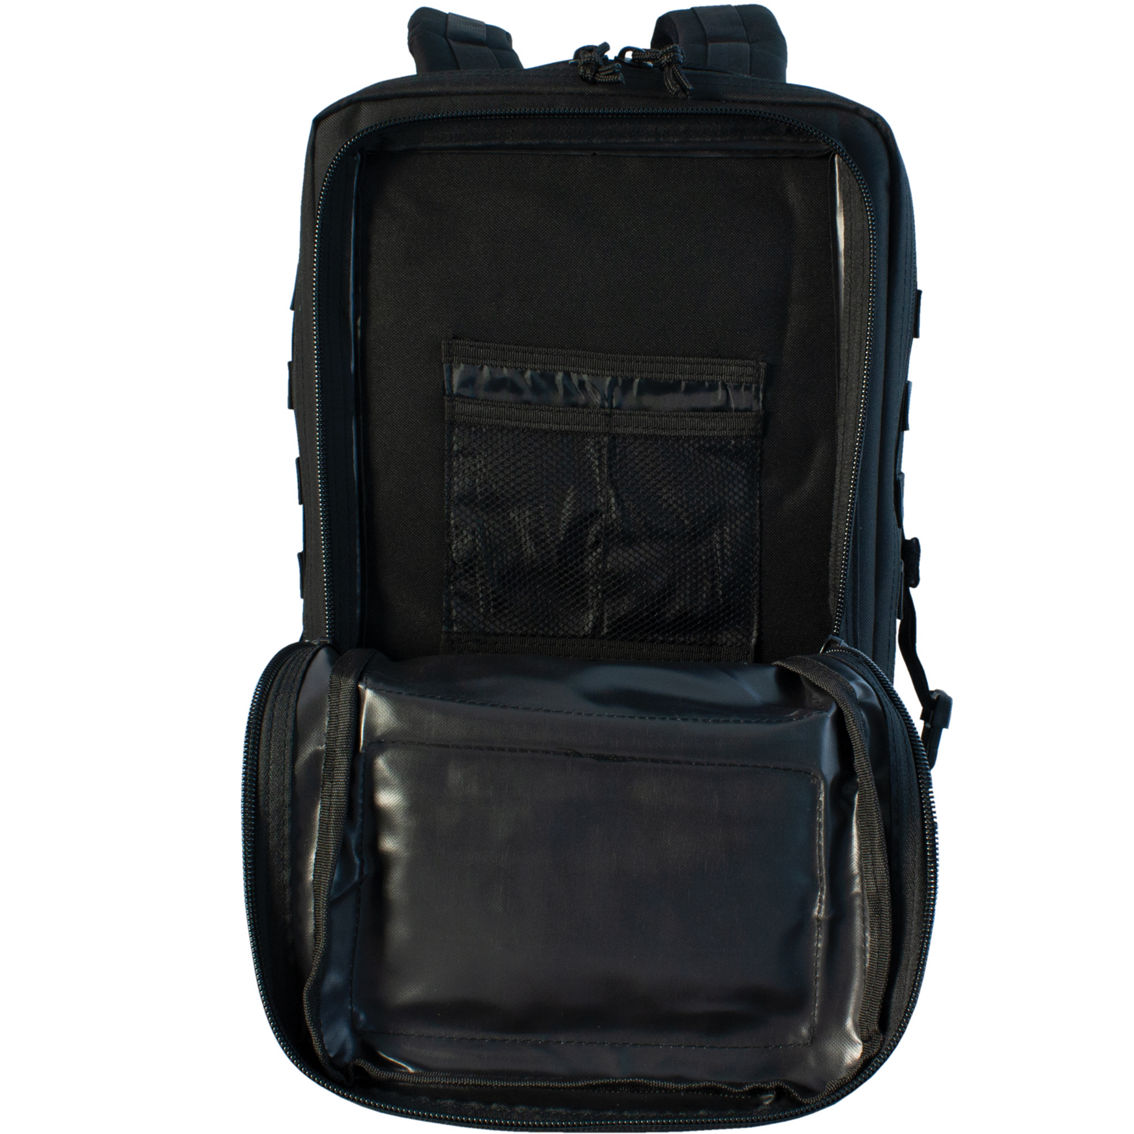 Red Rock Outdoor Gear Large Assault Pack - Image 6 of 7